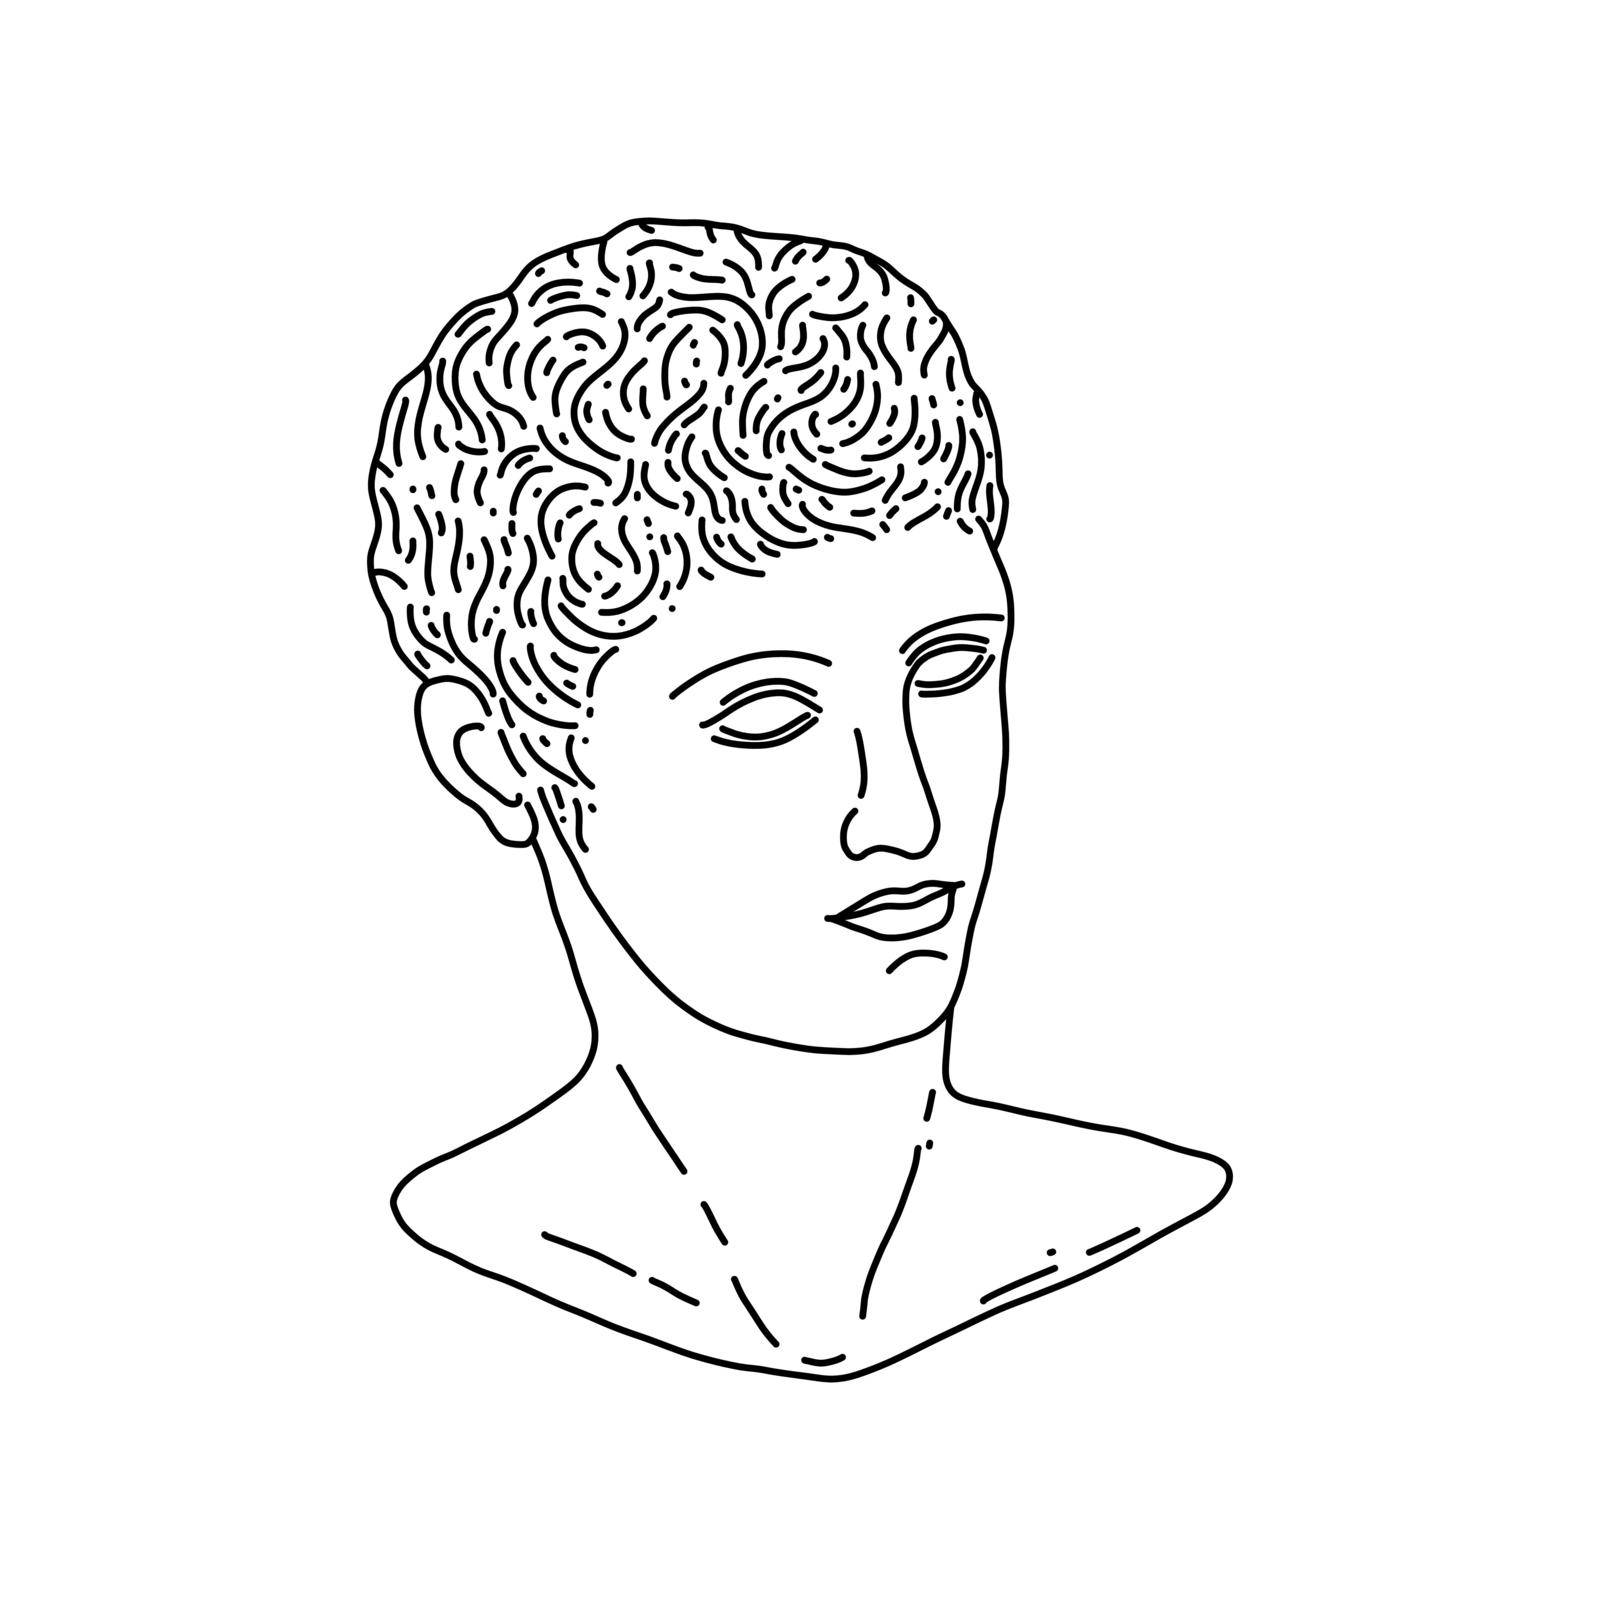 Greek god Hermes in doodle style on white background.